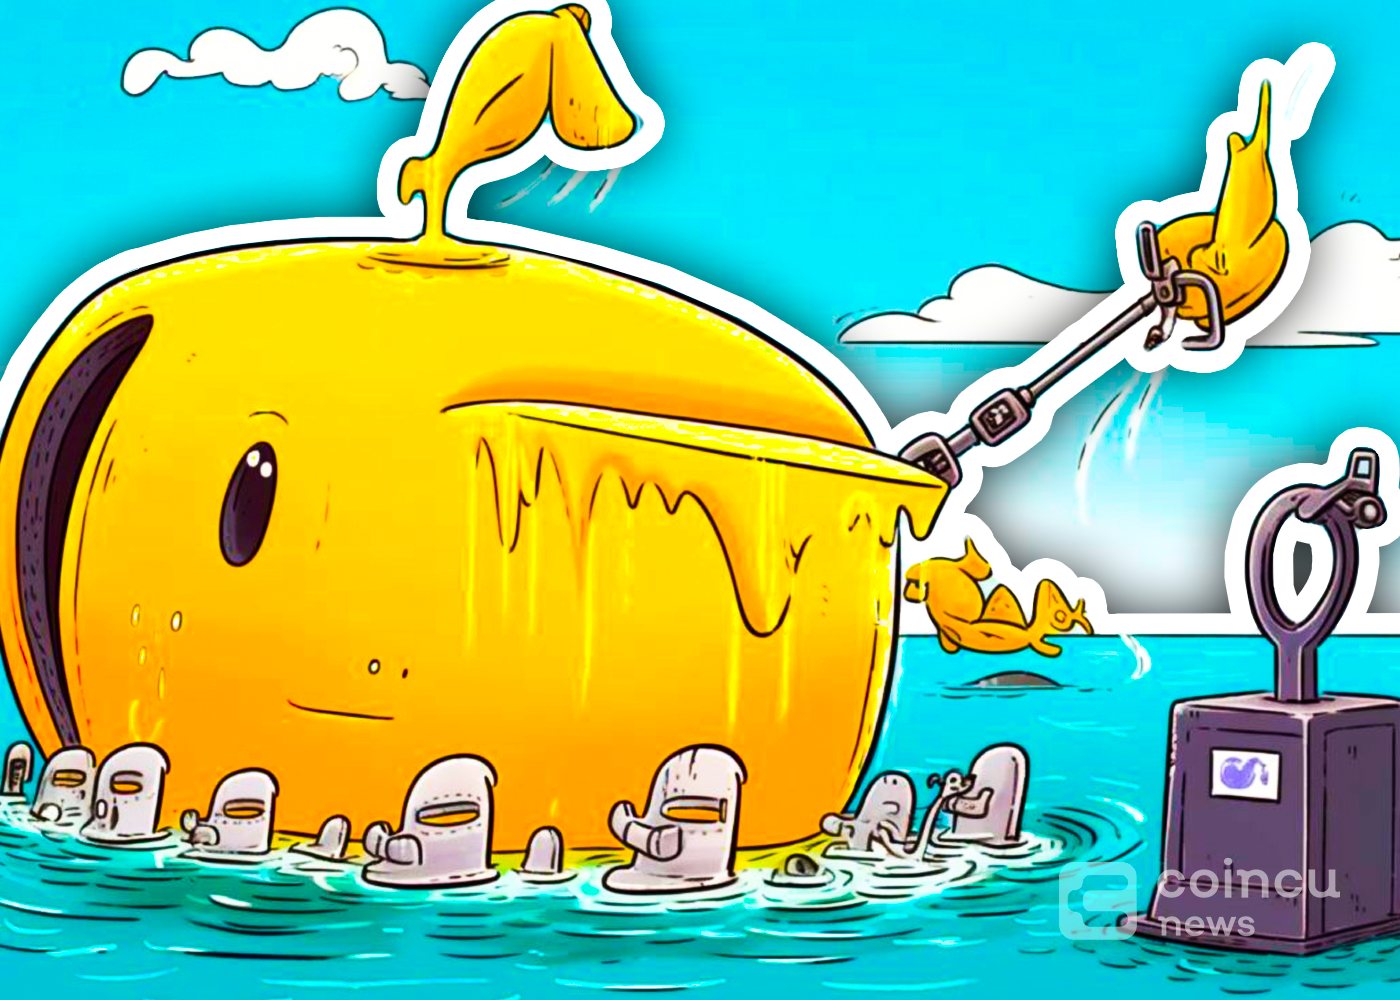 Binance-Sees-Huge-MKR-Withdrawals-As-Whale-Moves-Millions-In-Crypto